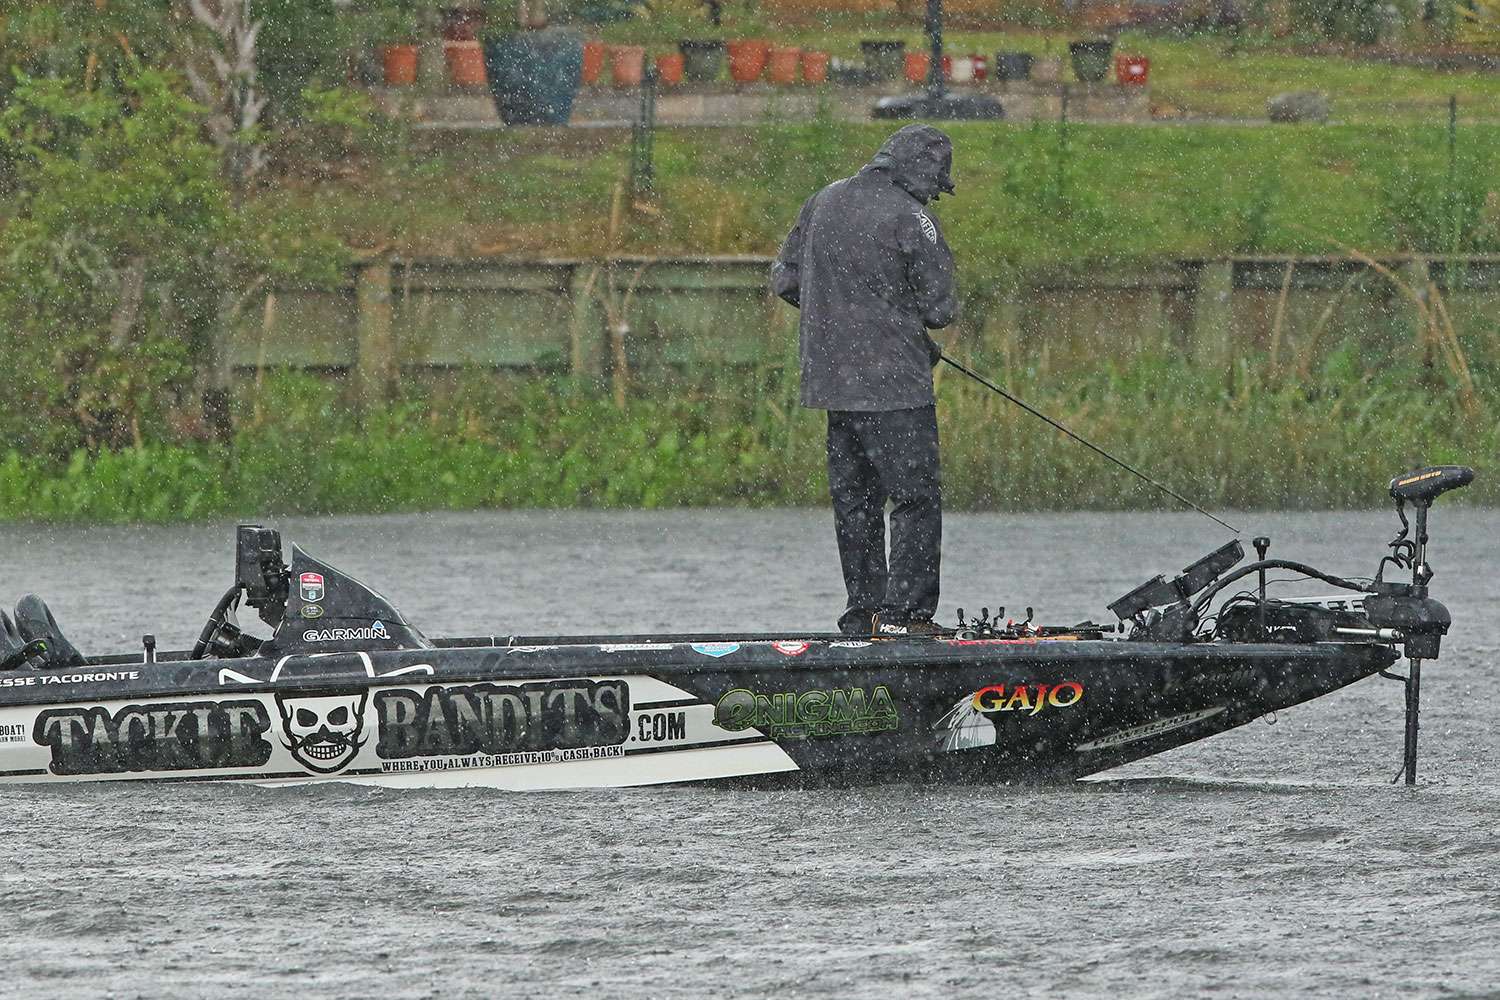 Join Jesse Tacoronte, Brandon Card and others as they ply the waters of the Cooper River during Day 2 of the 2019 Bass Pro Shops Bassmaster Elite at Winyah Bay.